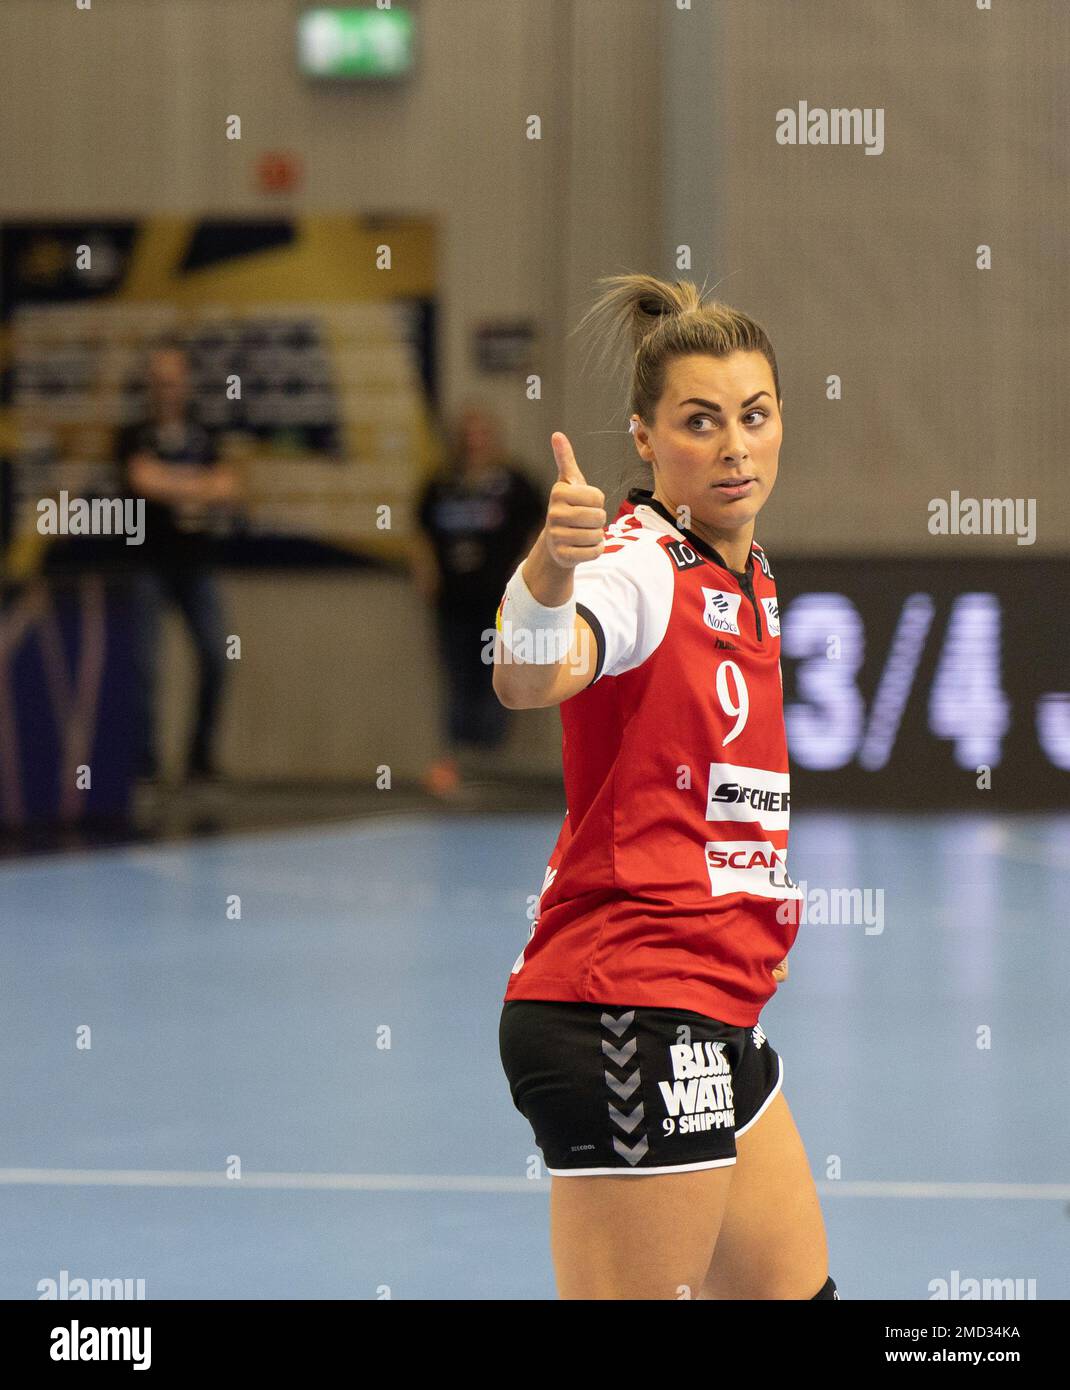 January 22, 2023, Hamar, Innlandet, Norway: Hamar, Norway, January 22nd  2023: Nora Mork (9 Team Esbjerg) give a thumbs up to her teammate during  the EHF Champions League game between Storhamar and